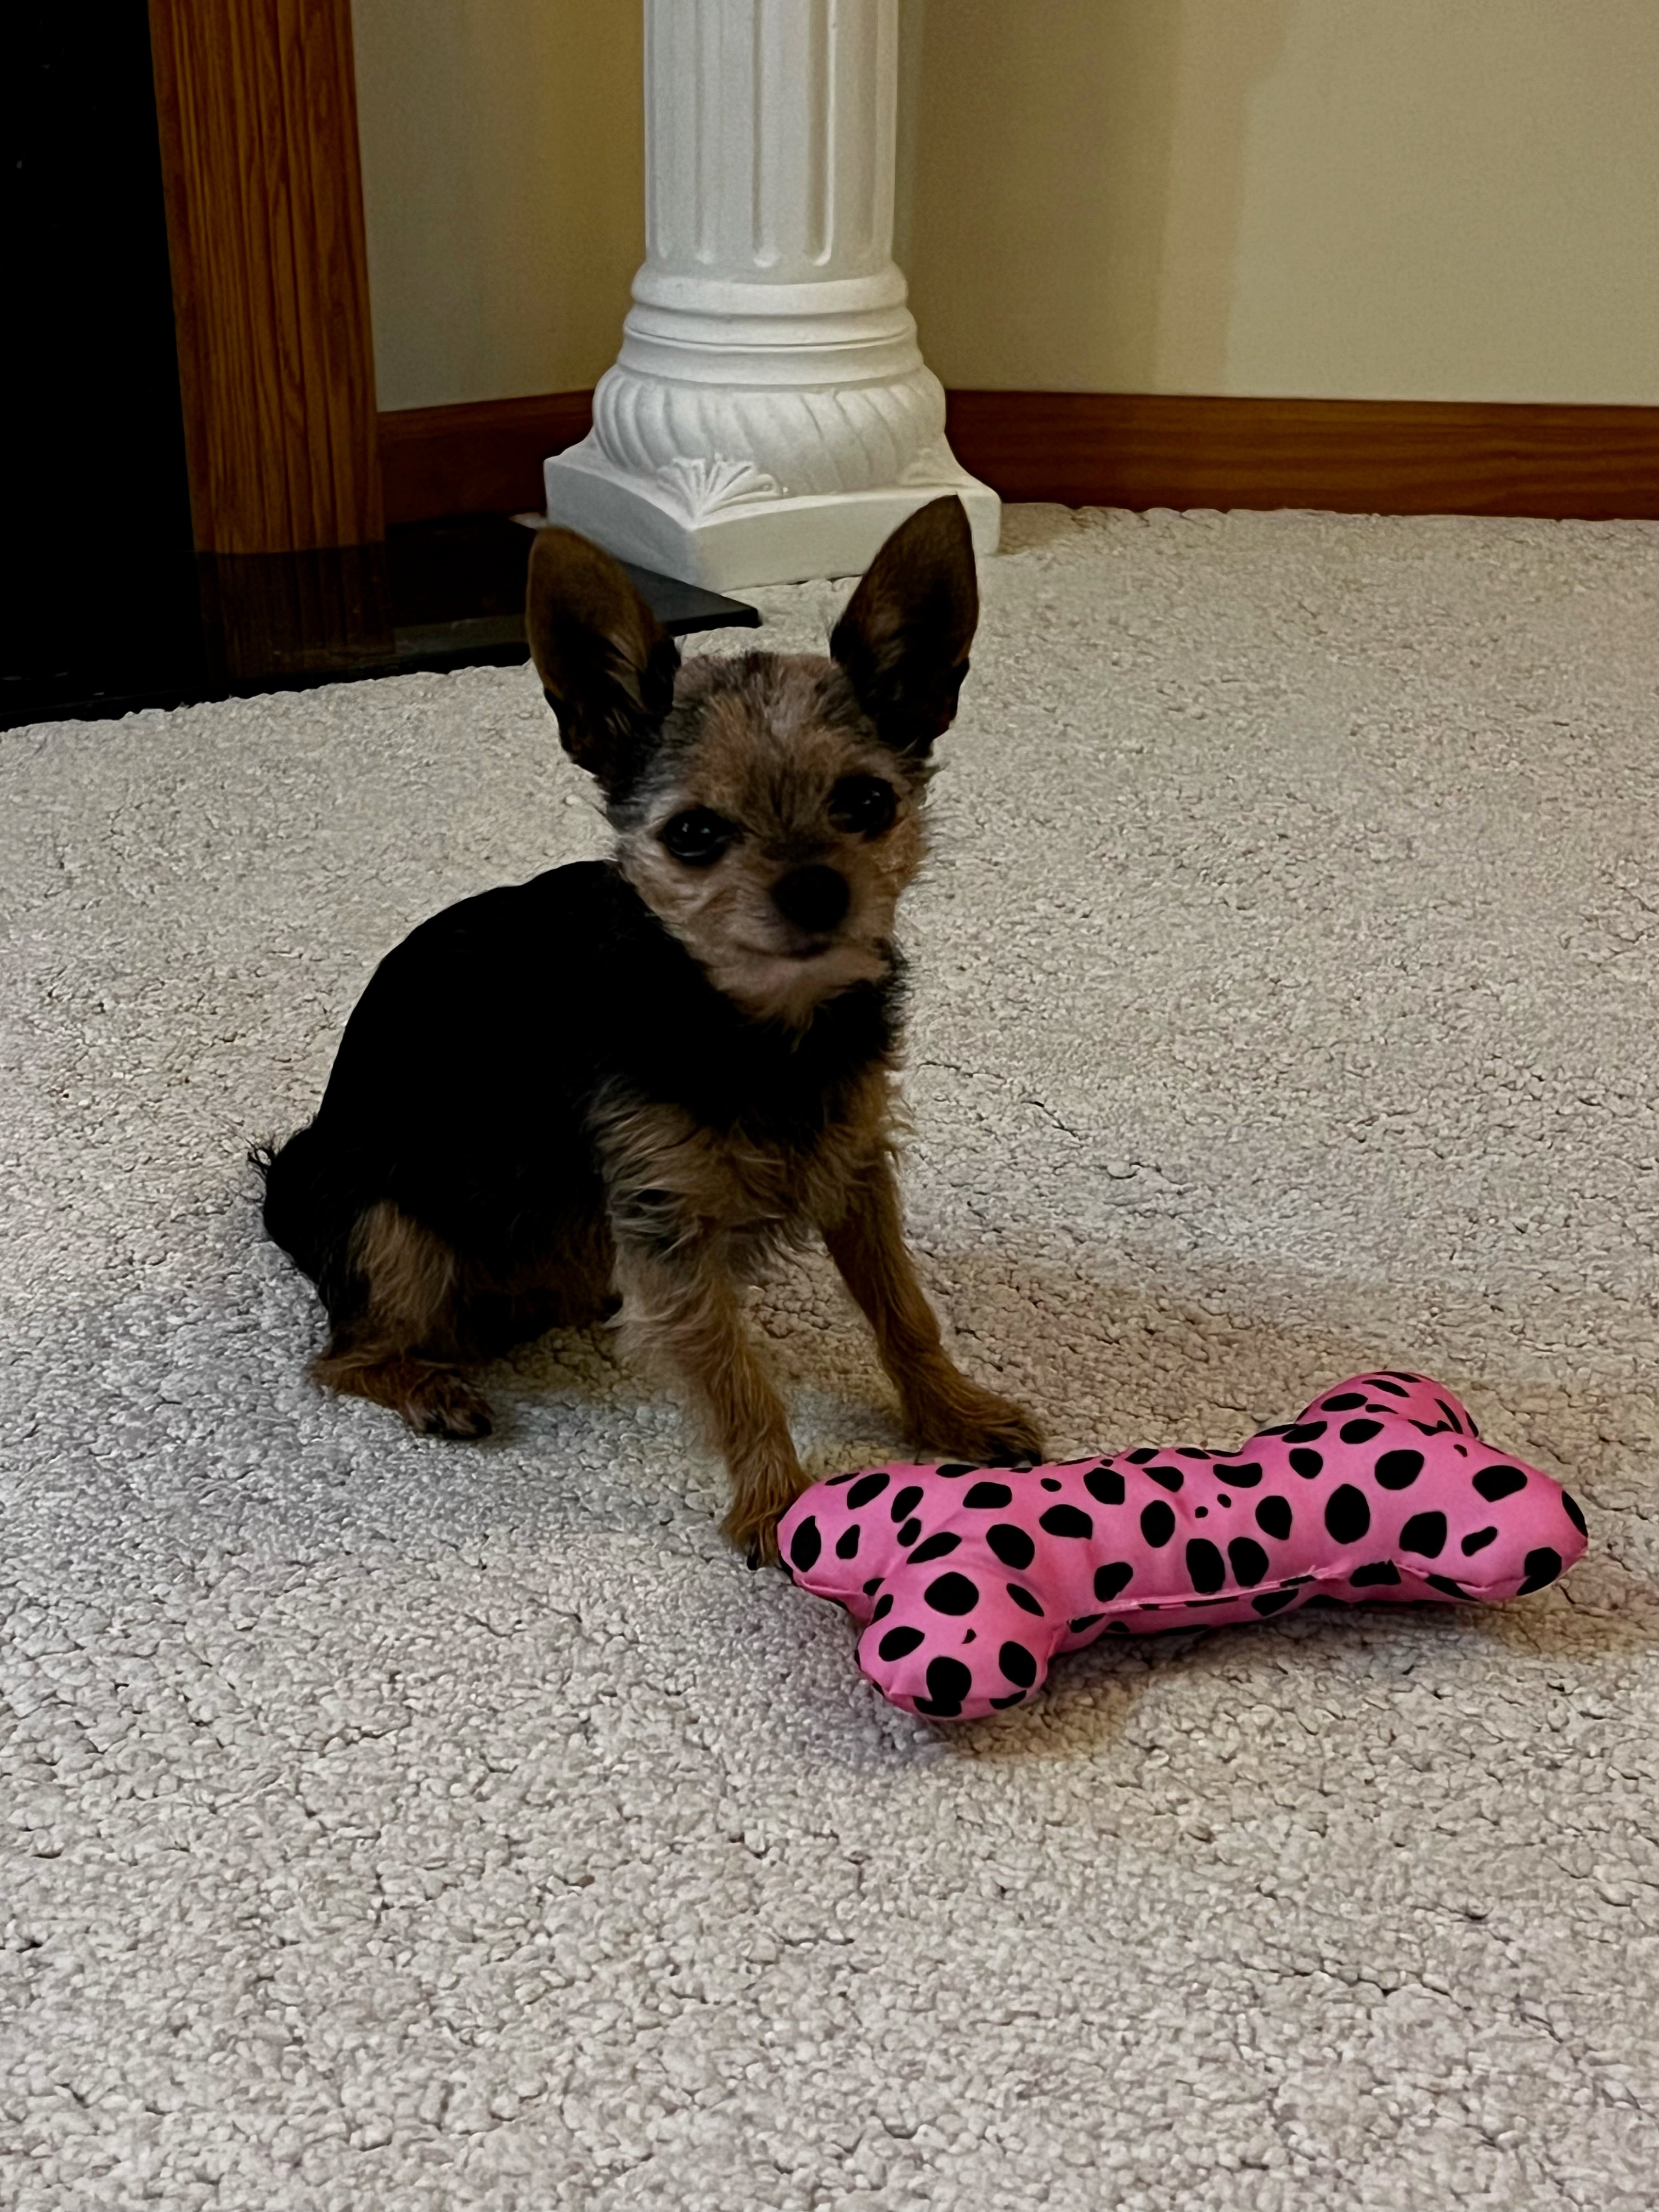 small dog on floor with leopard spotted toy